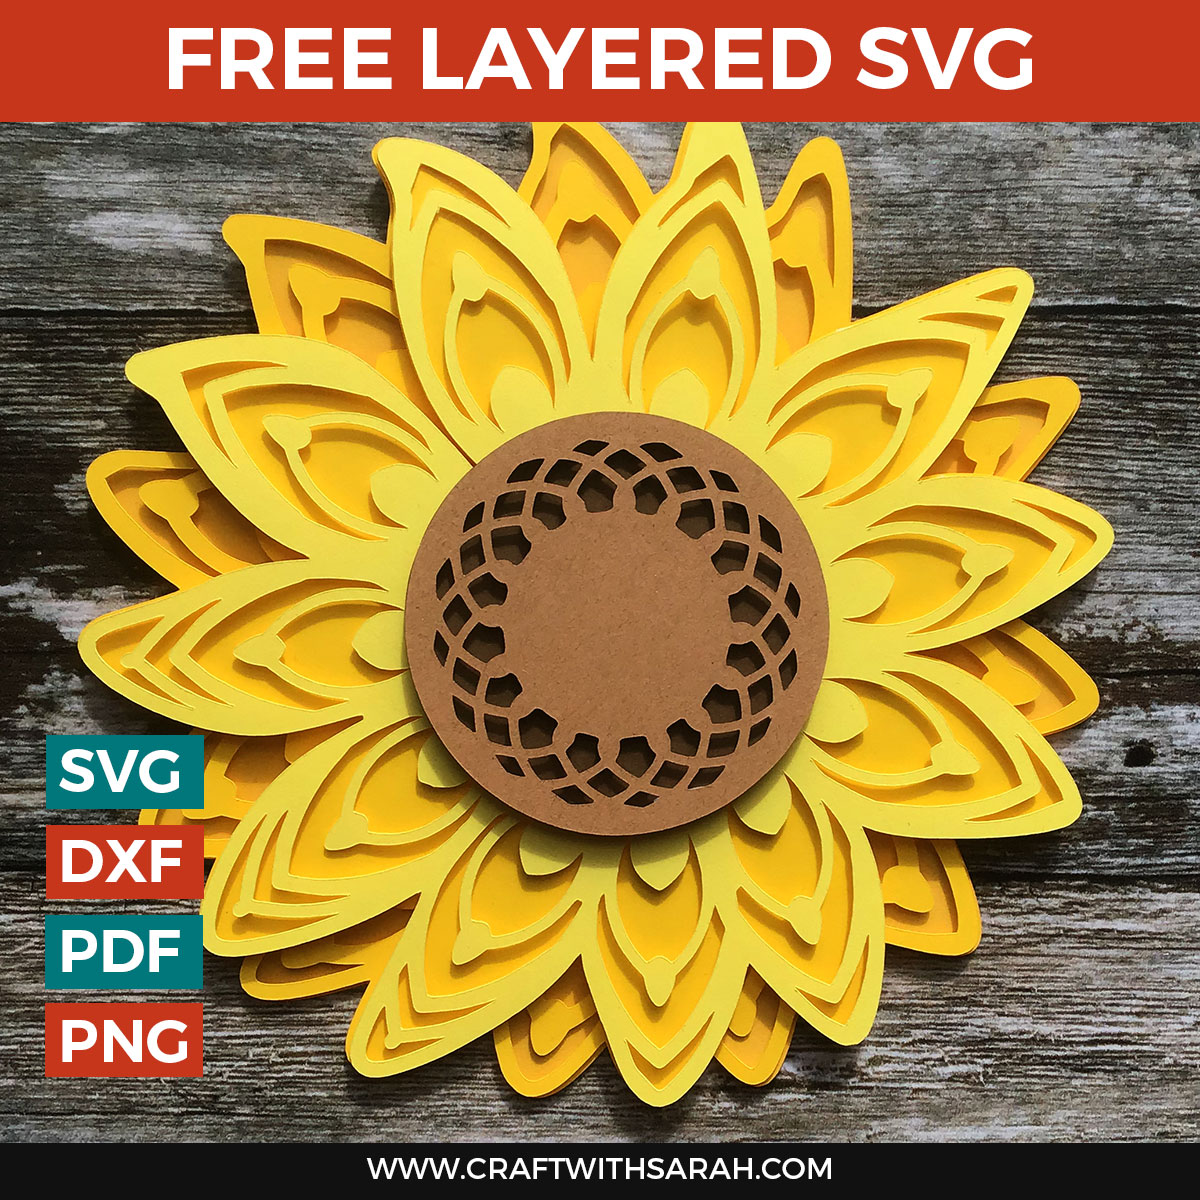 Download Free Svgs For Cricut Craft With Sarah